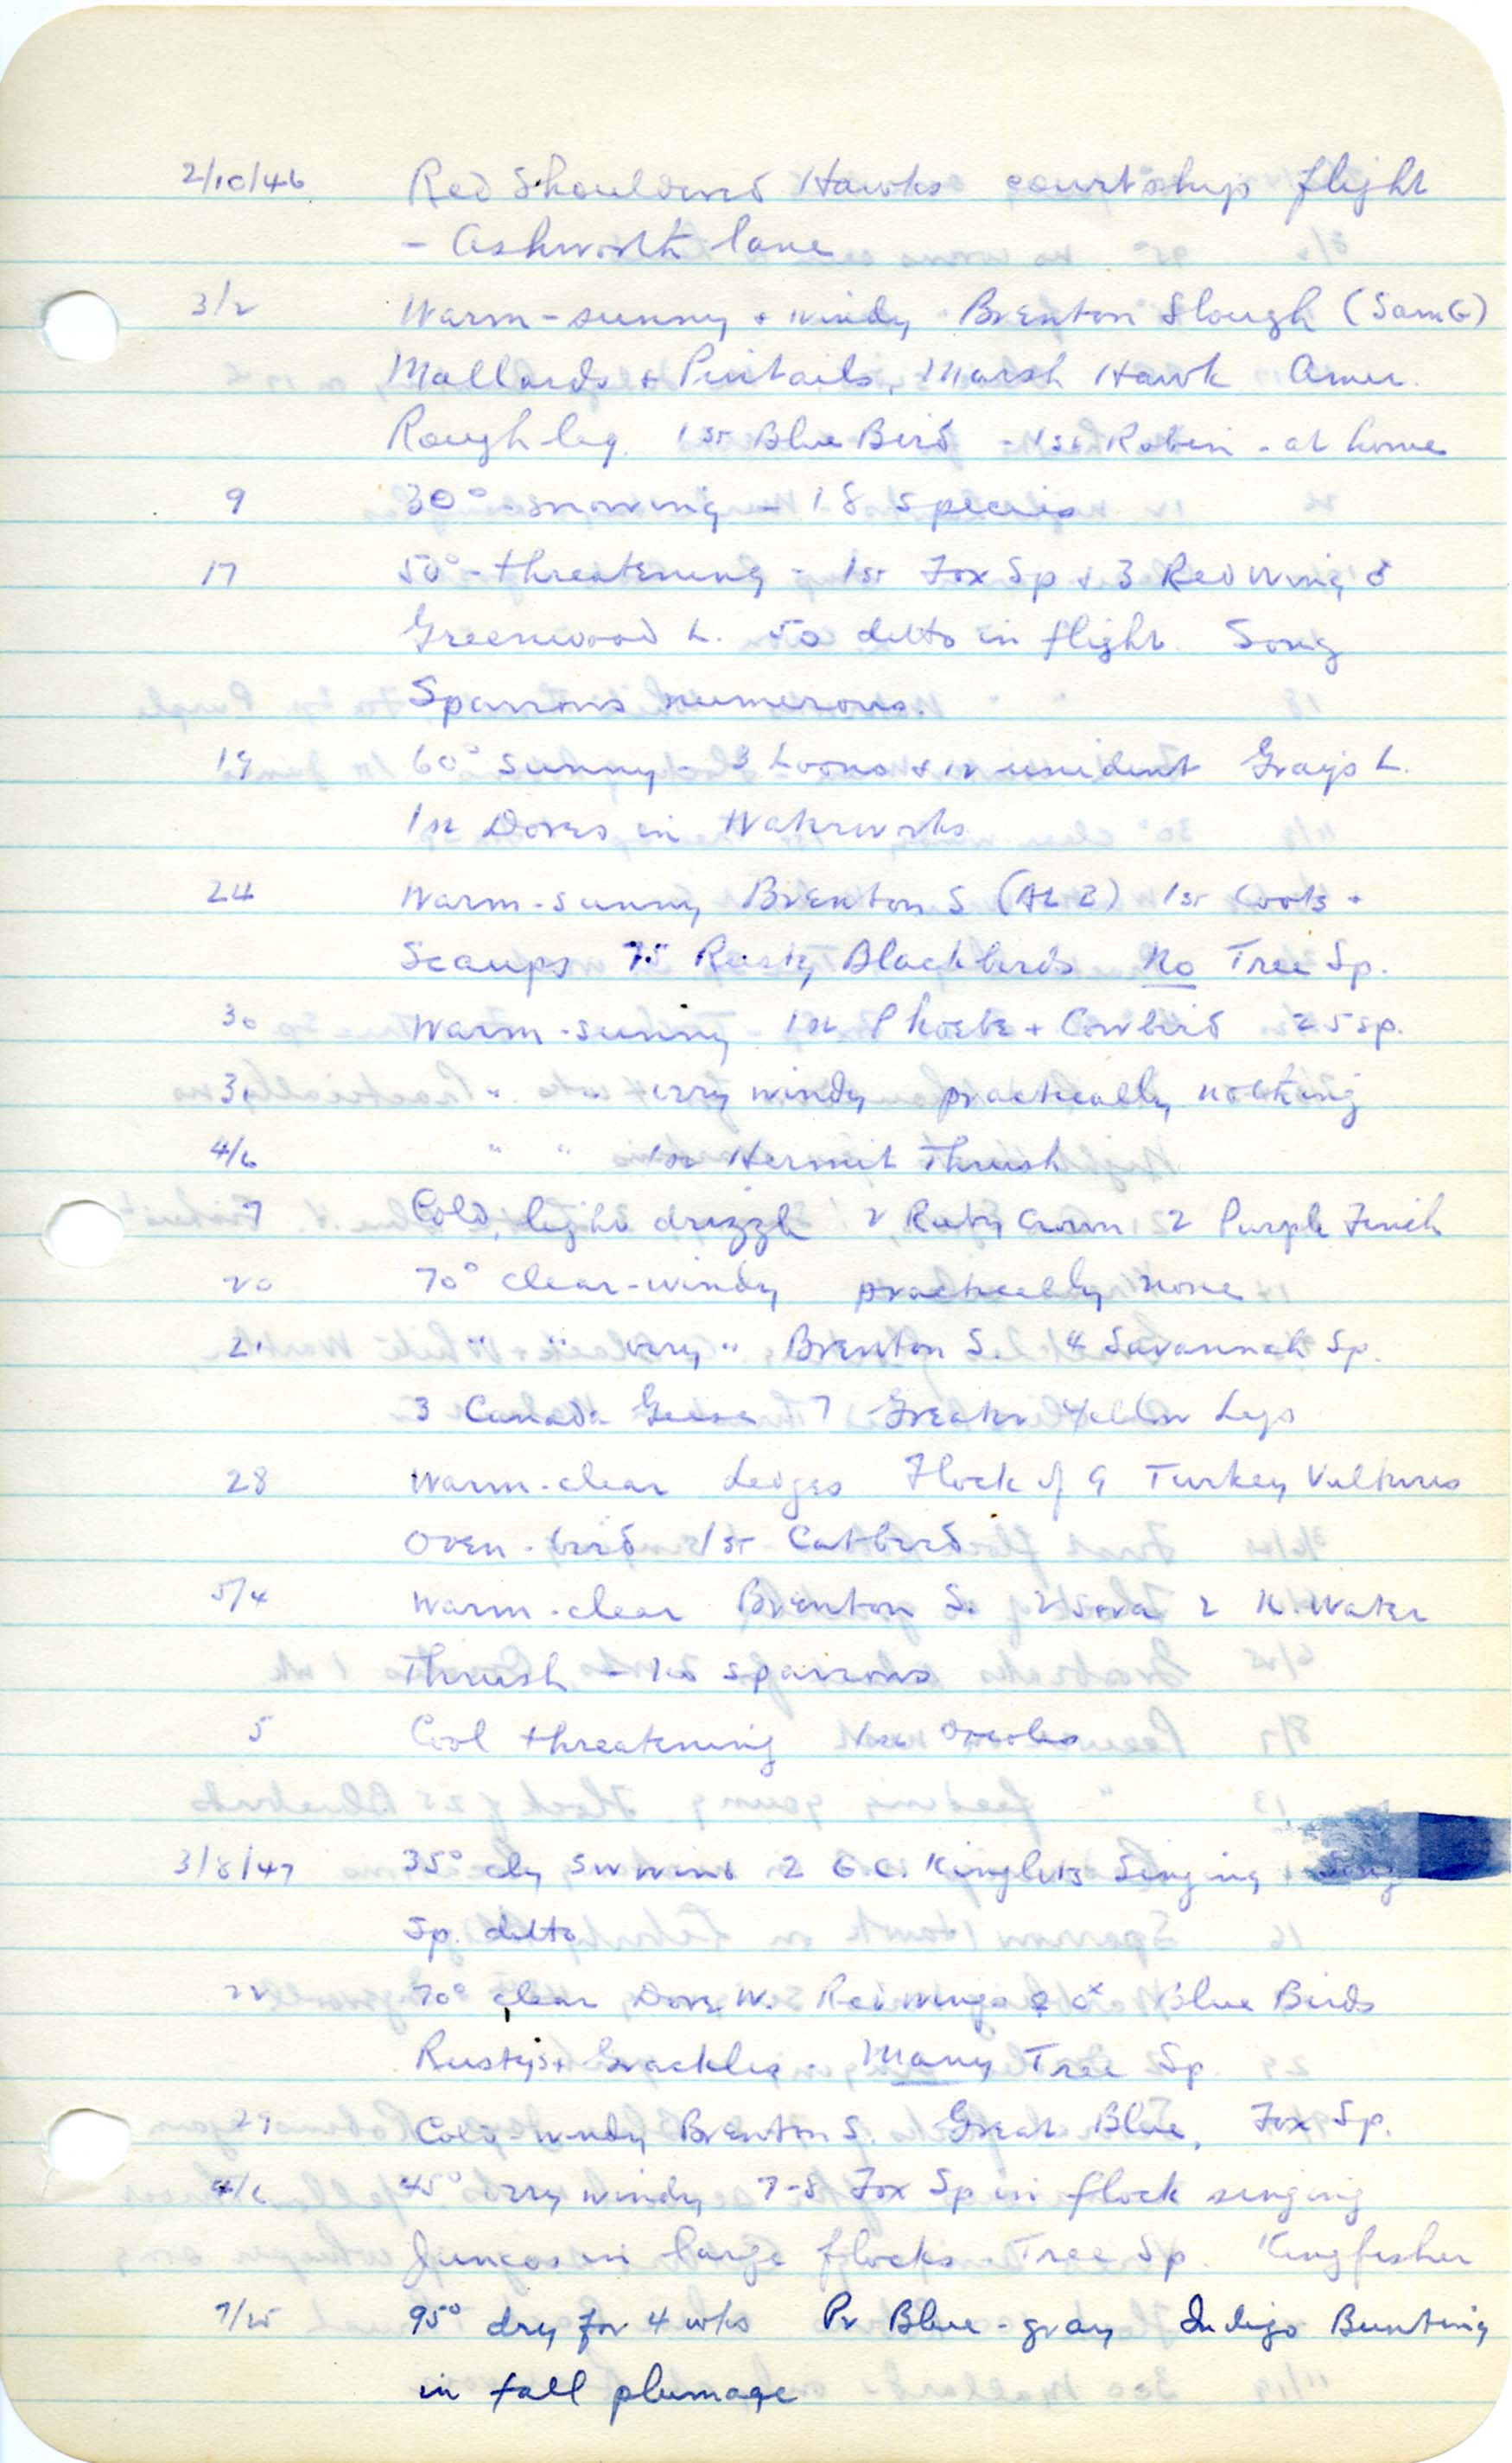 Birdwatching notes compiled by Woodward Hart Brown, 1946-1980